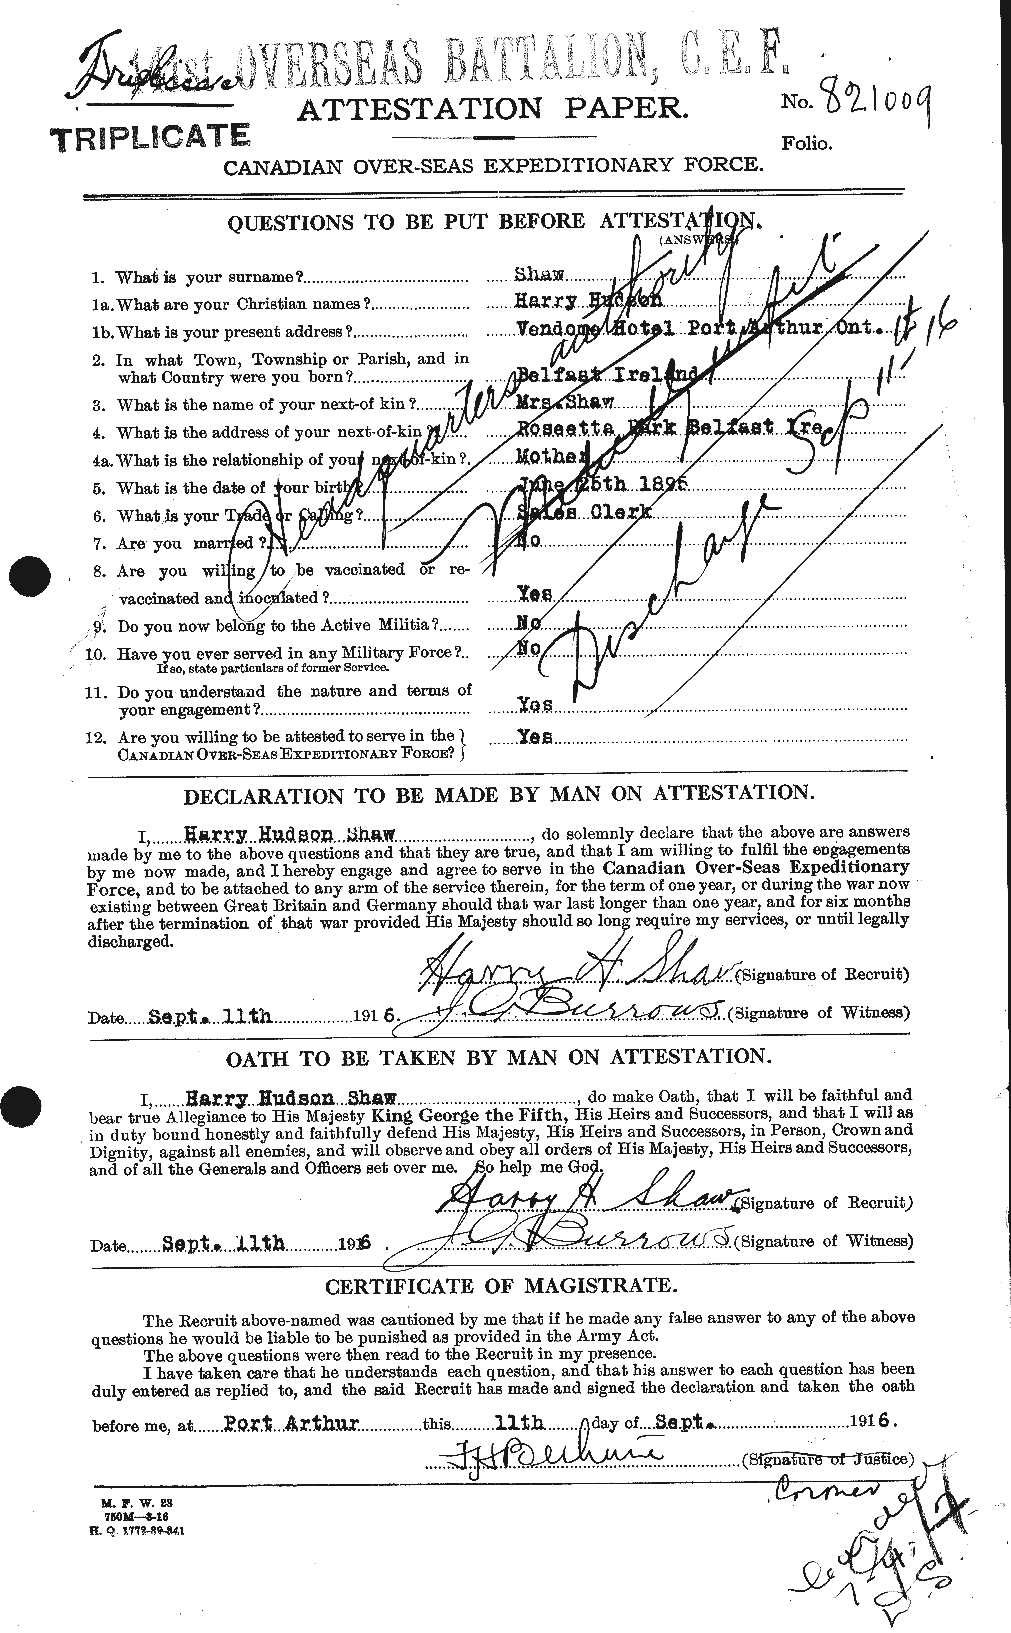 Personnel Records of the First World War - CEF 091358a